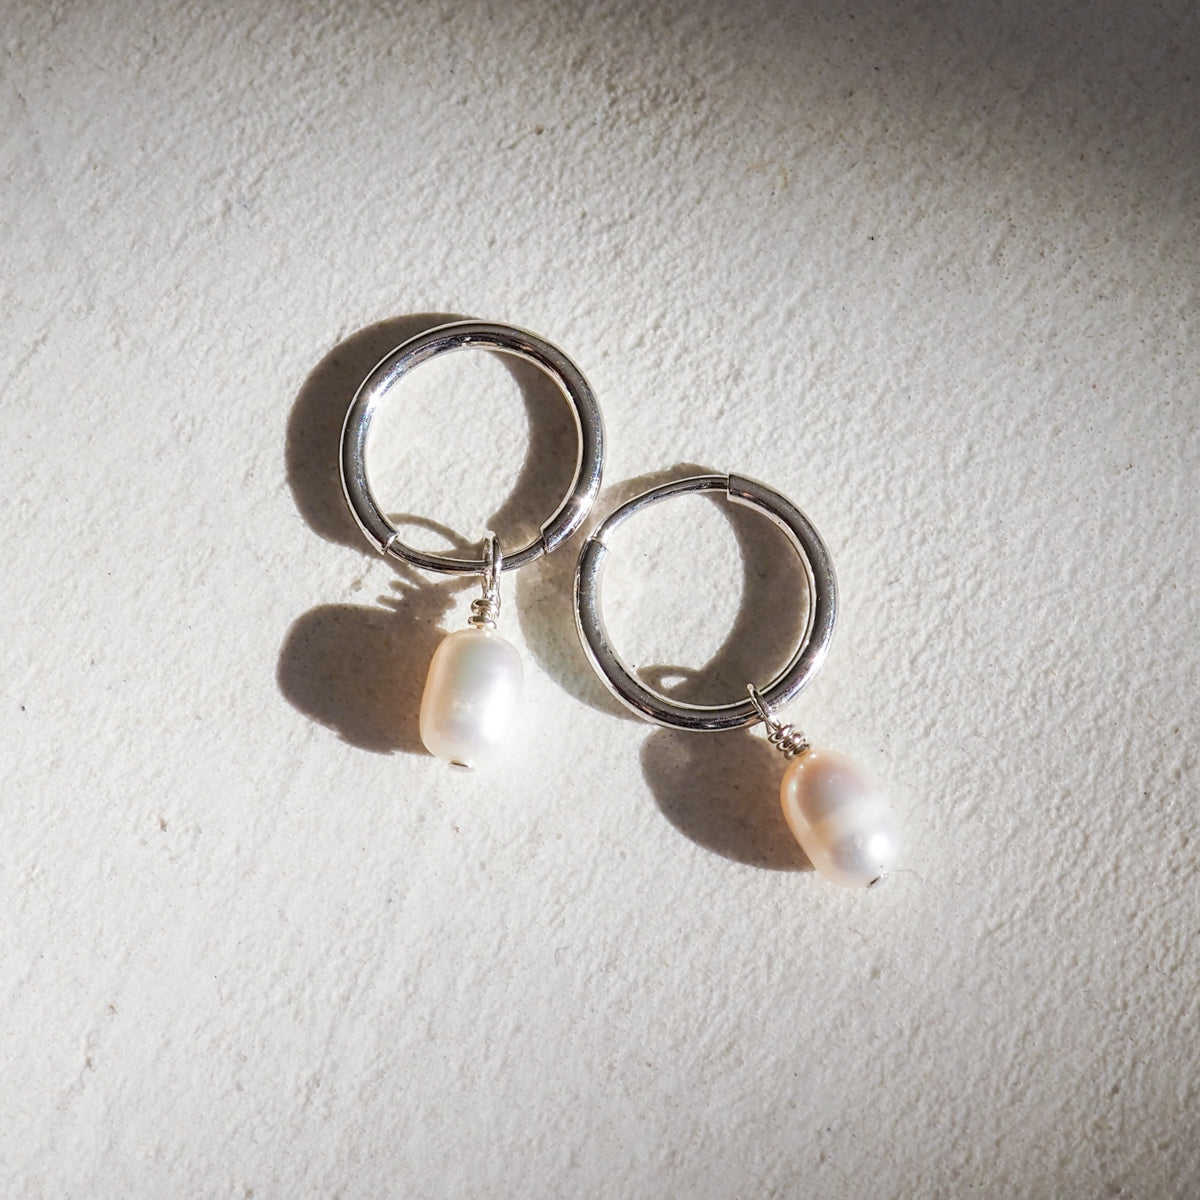 Archive — Tiny Organic Pearl Earrings